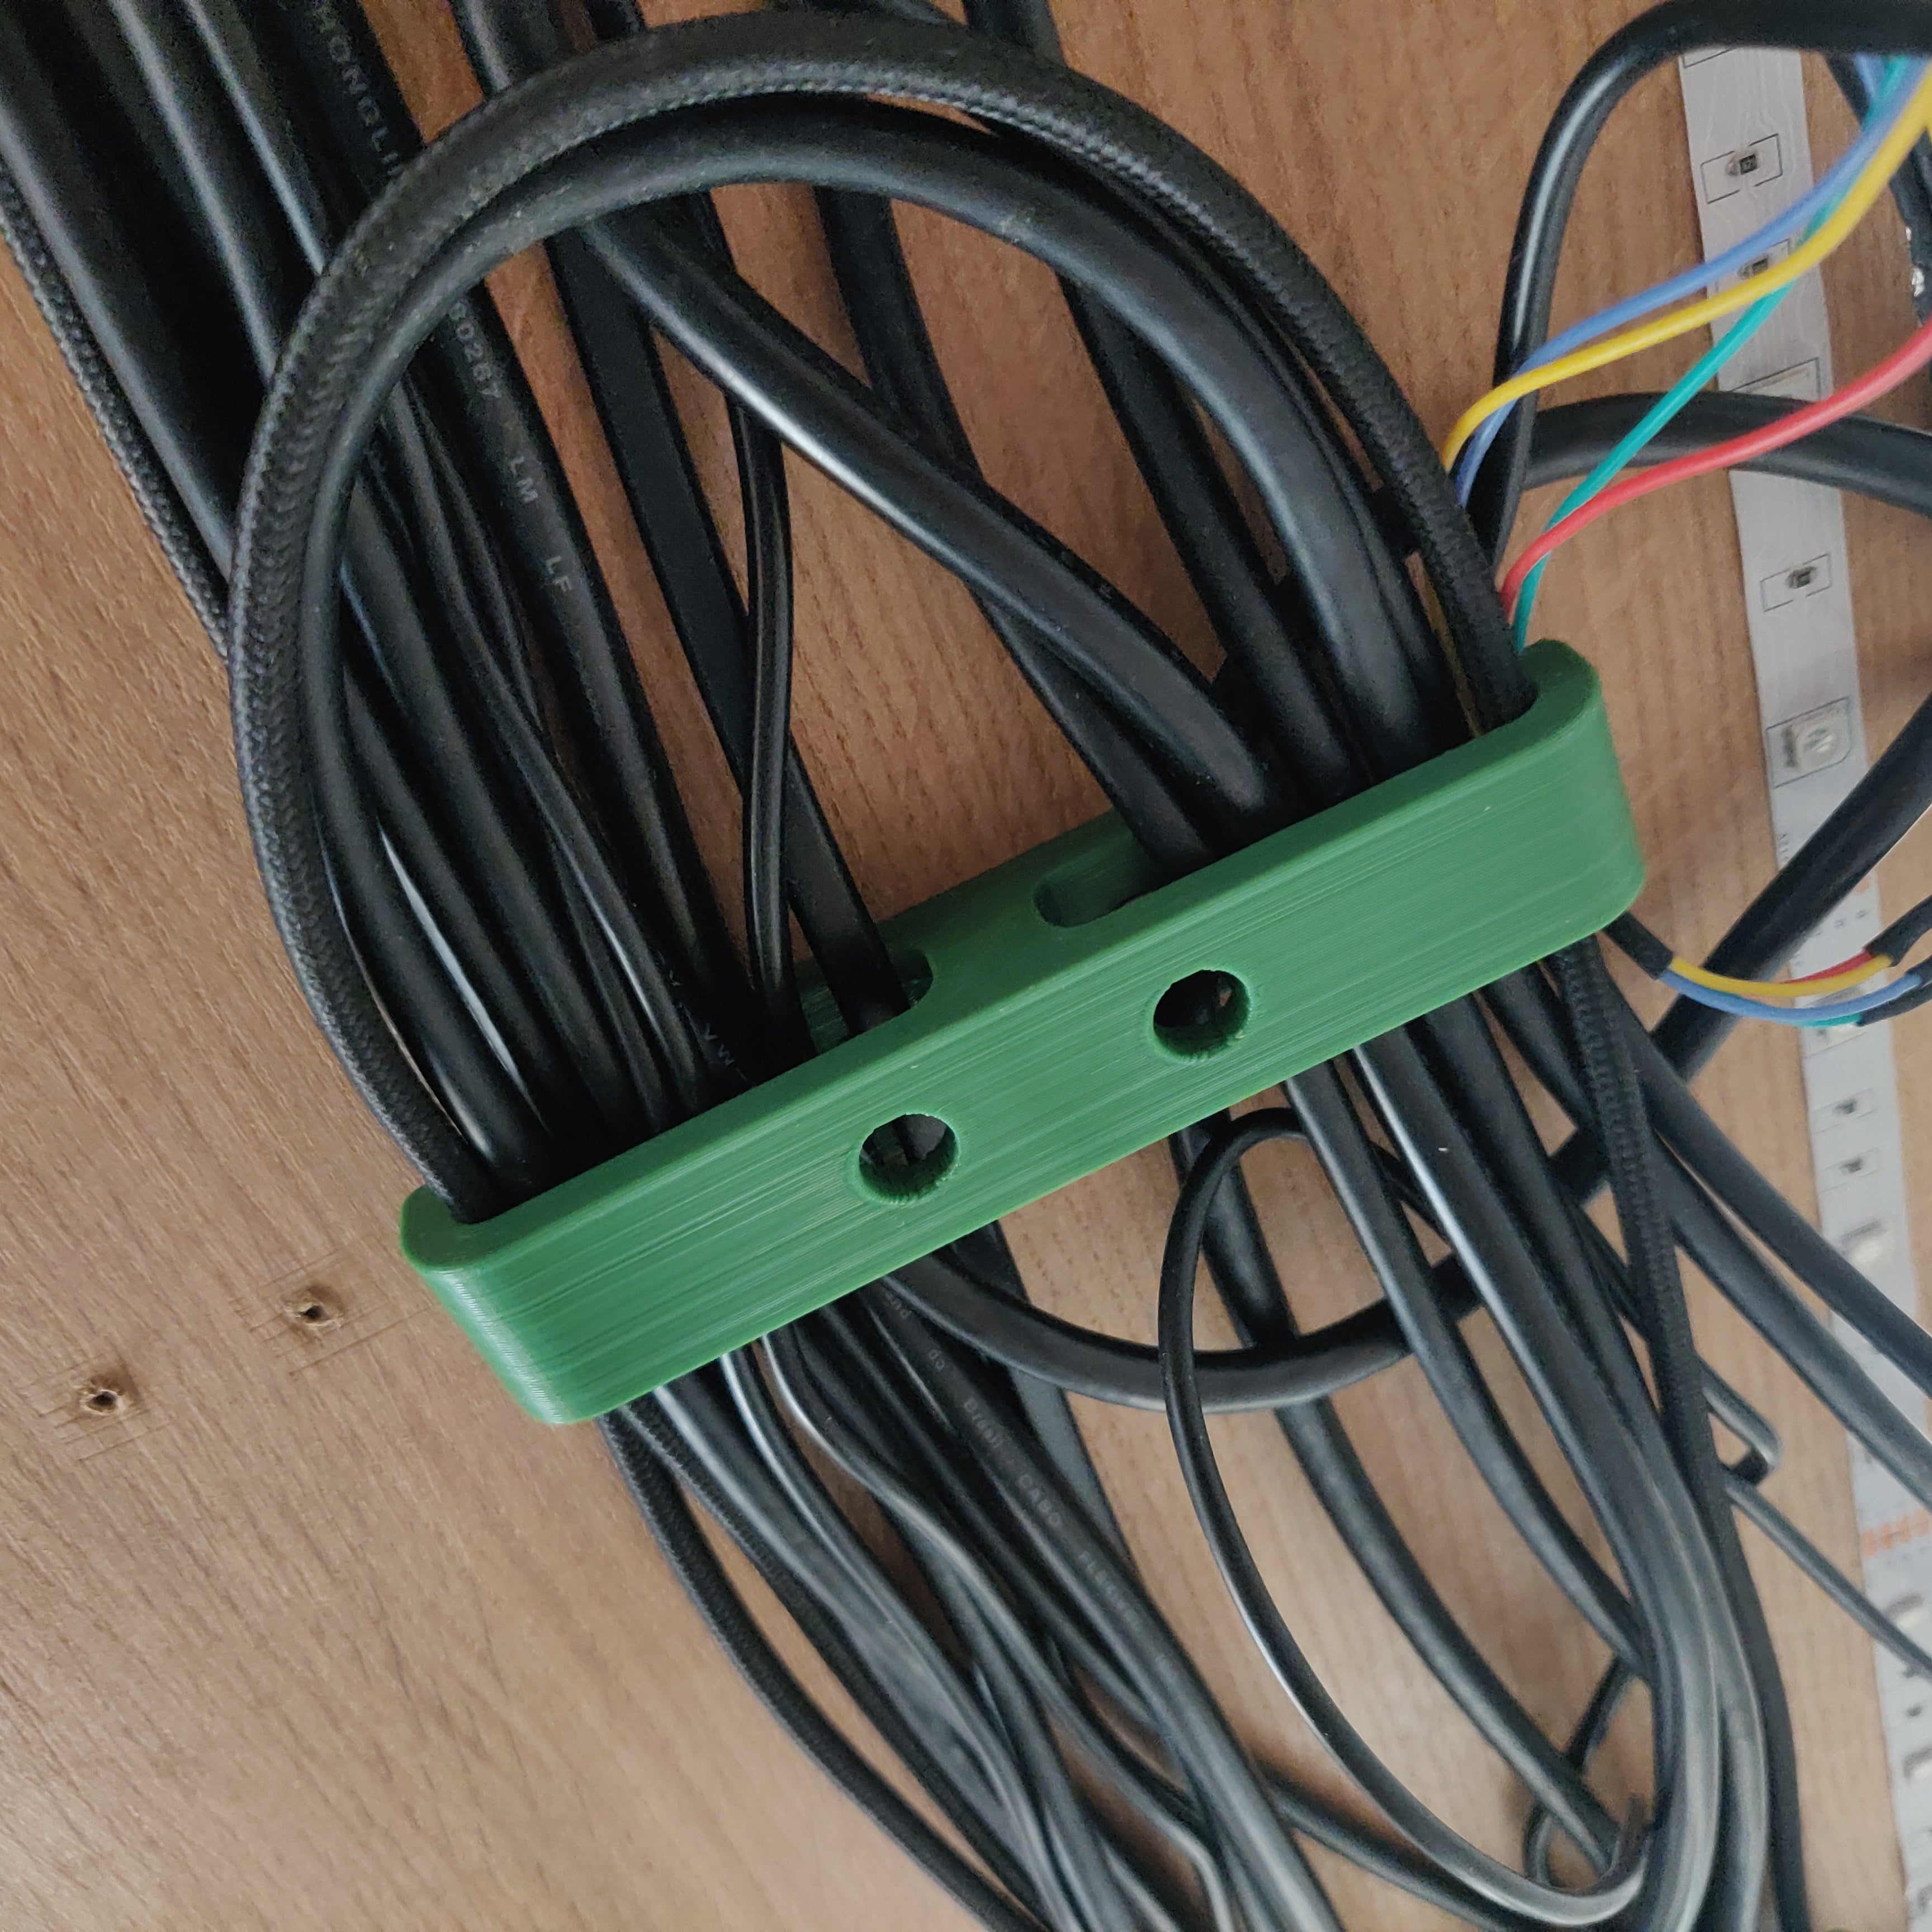 Cable holder for cable management